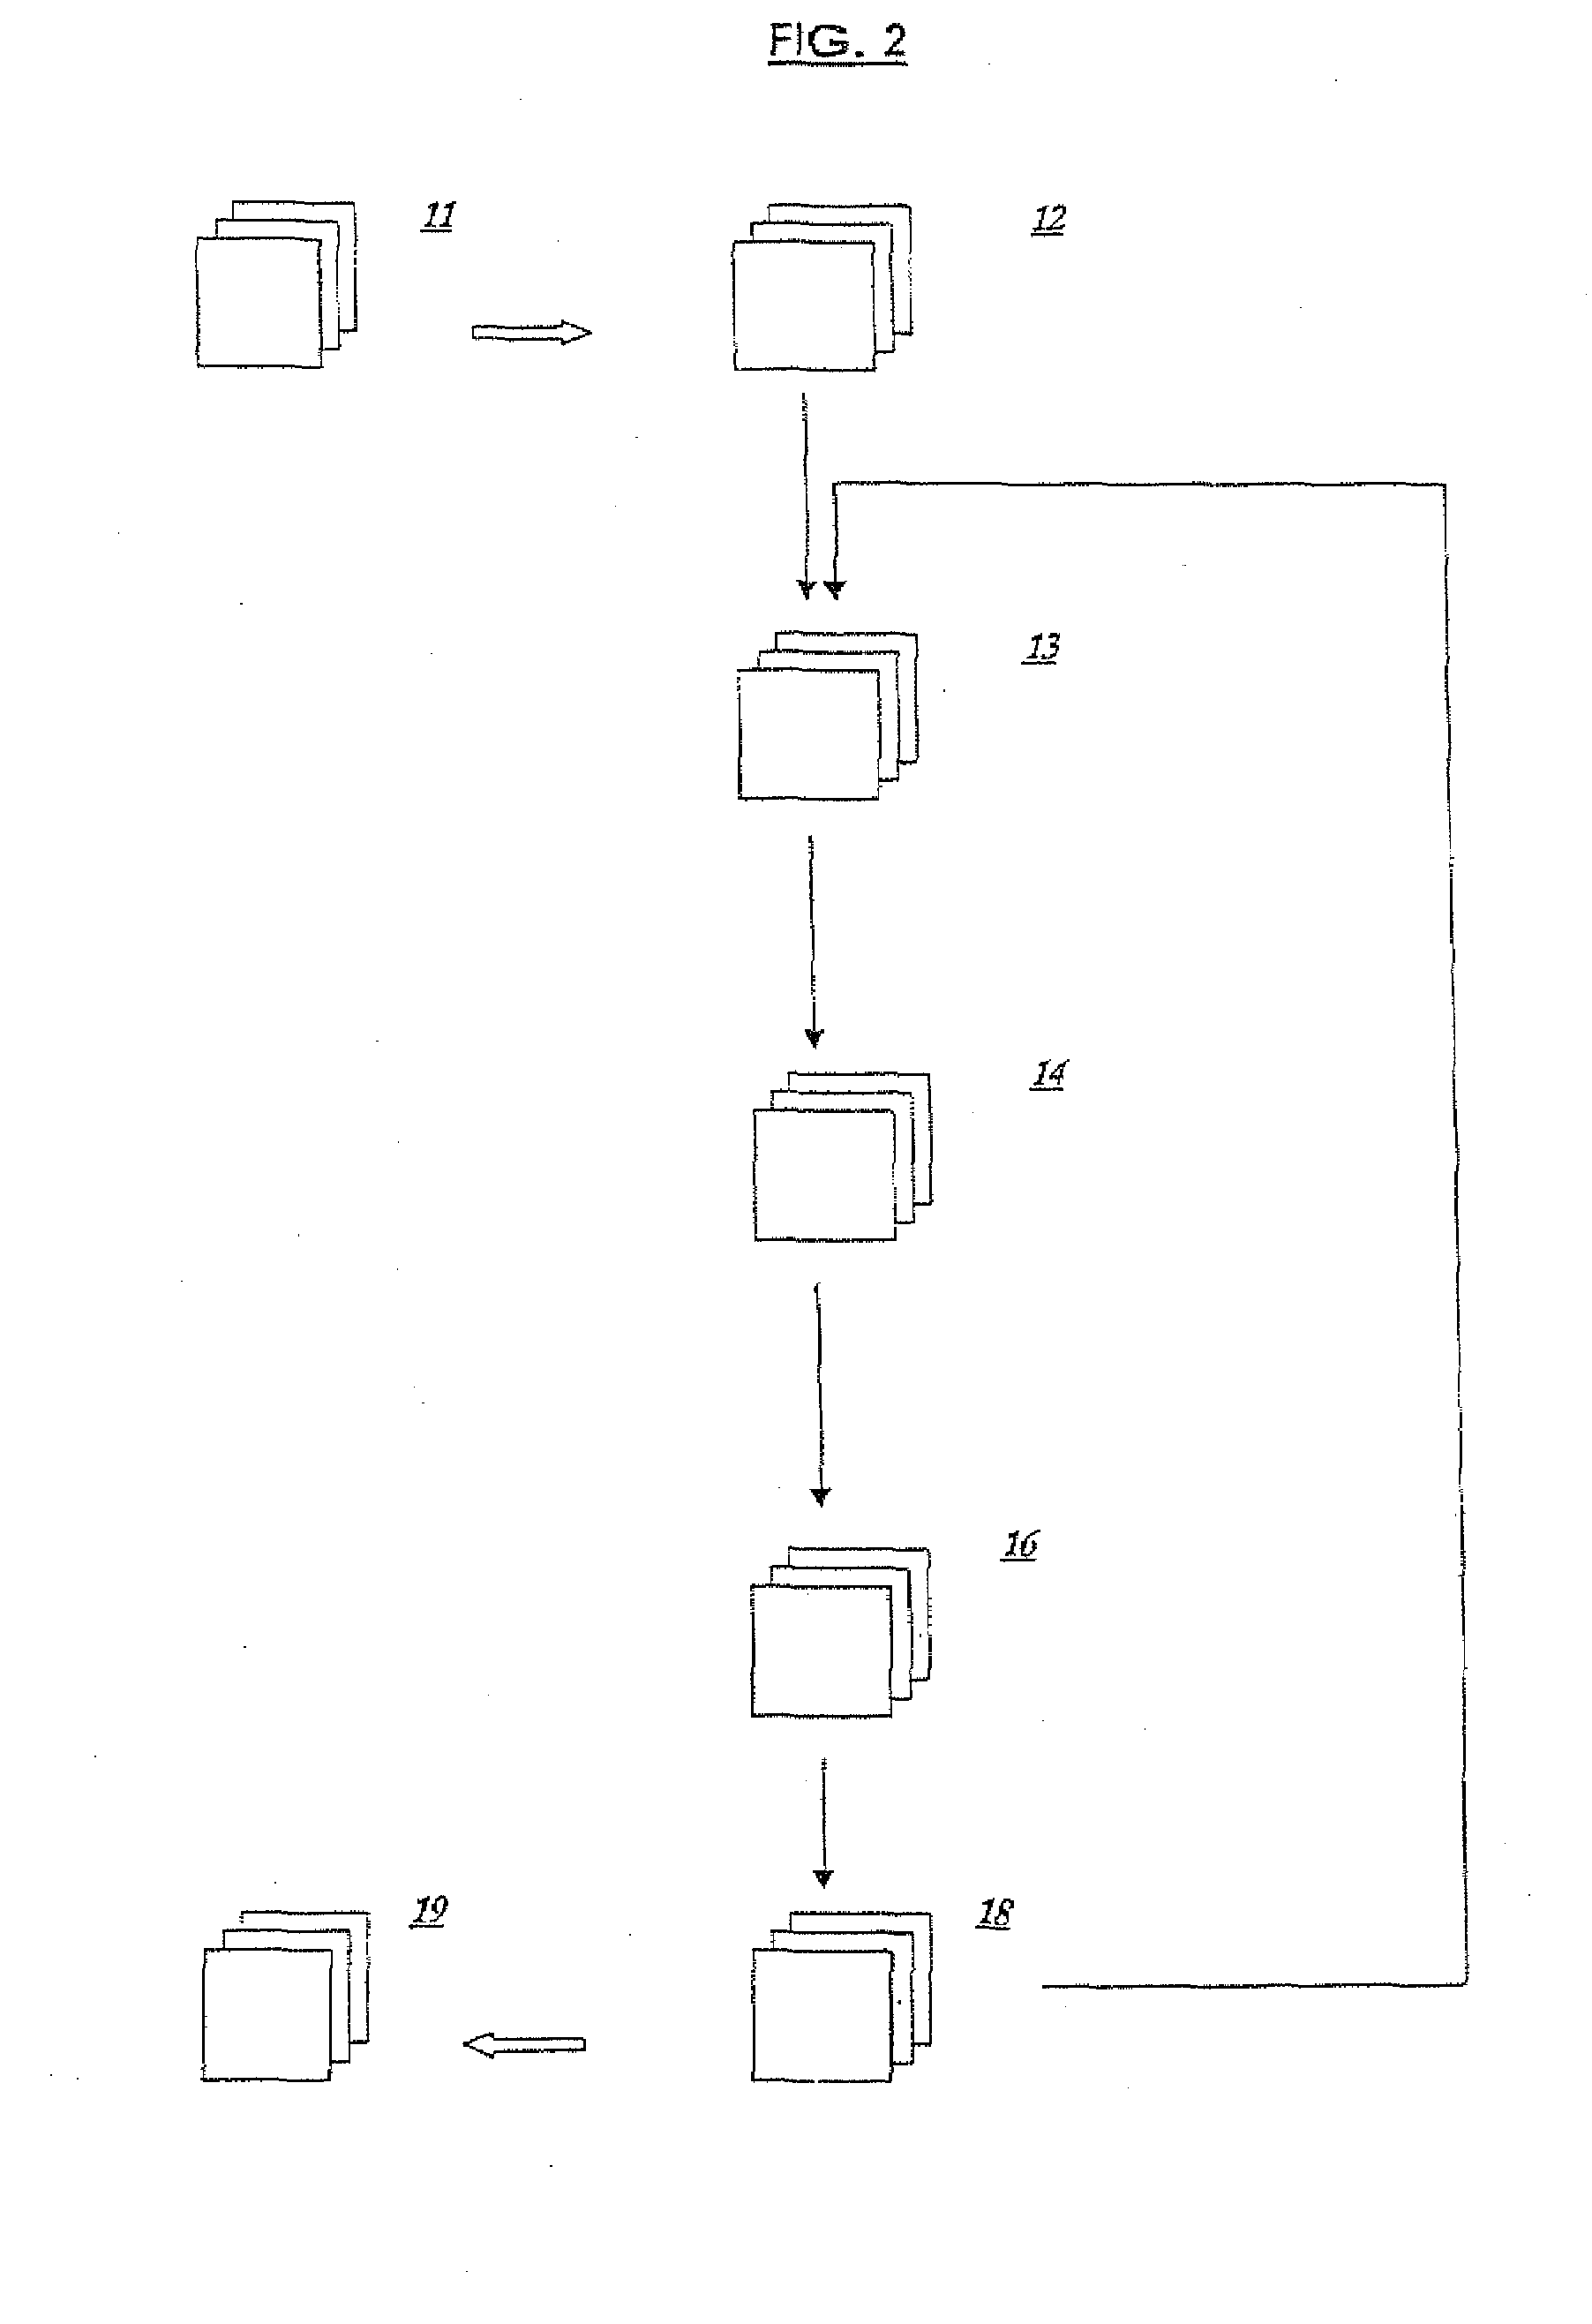 Method of testing an electronic system